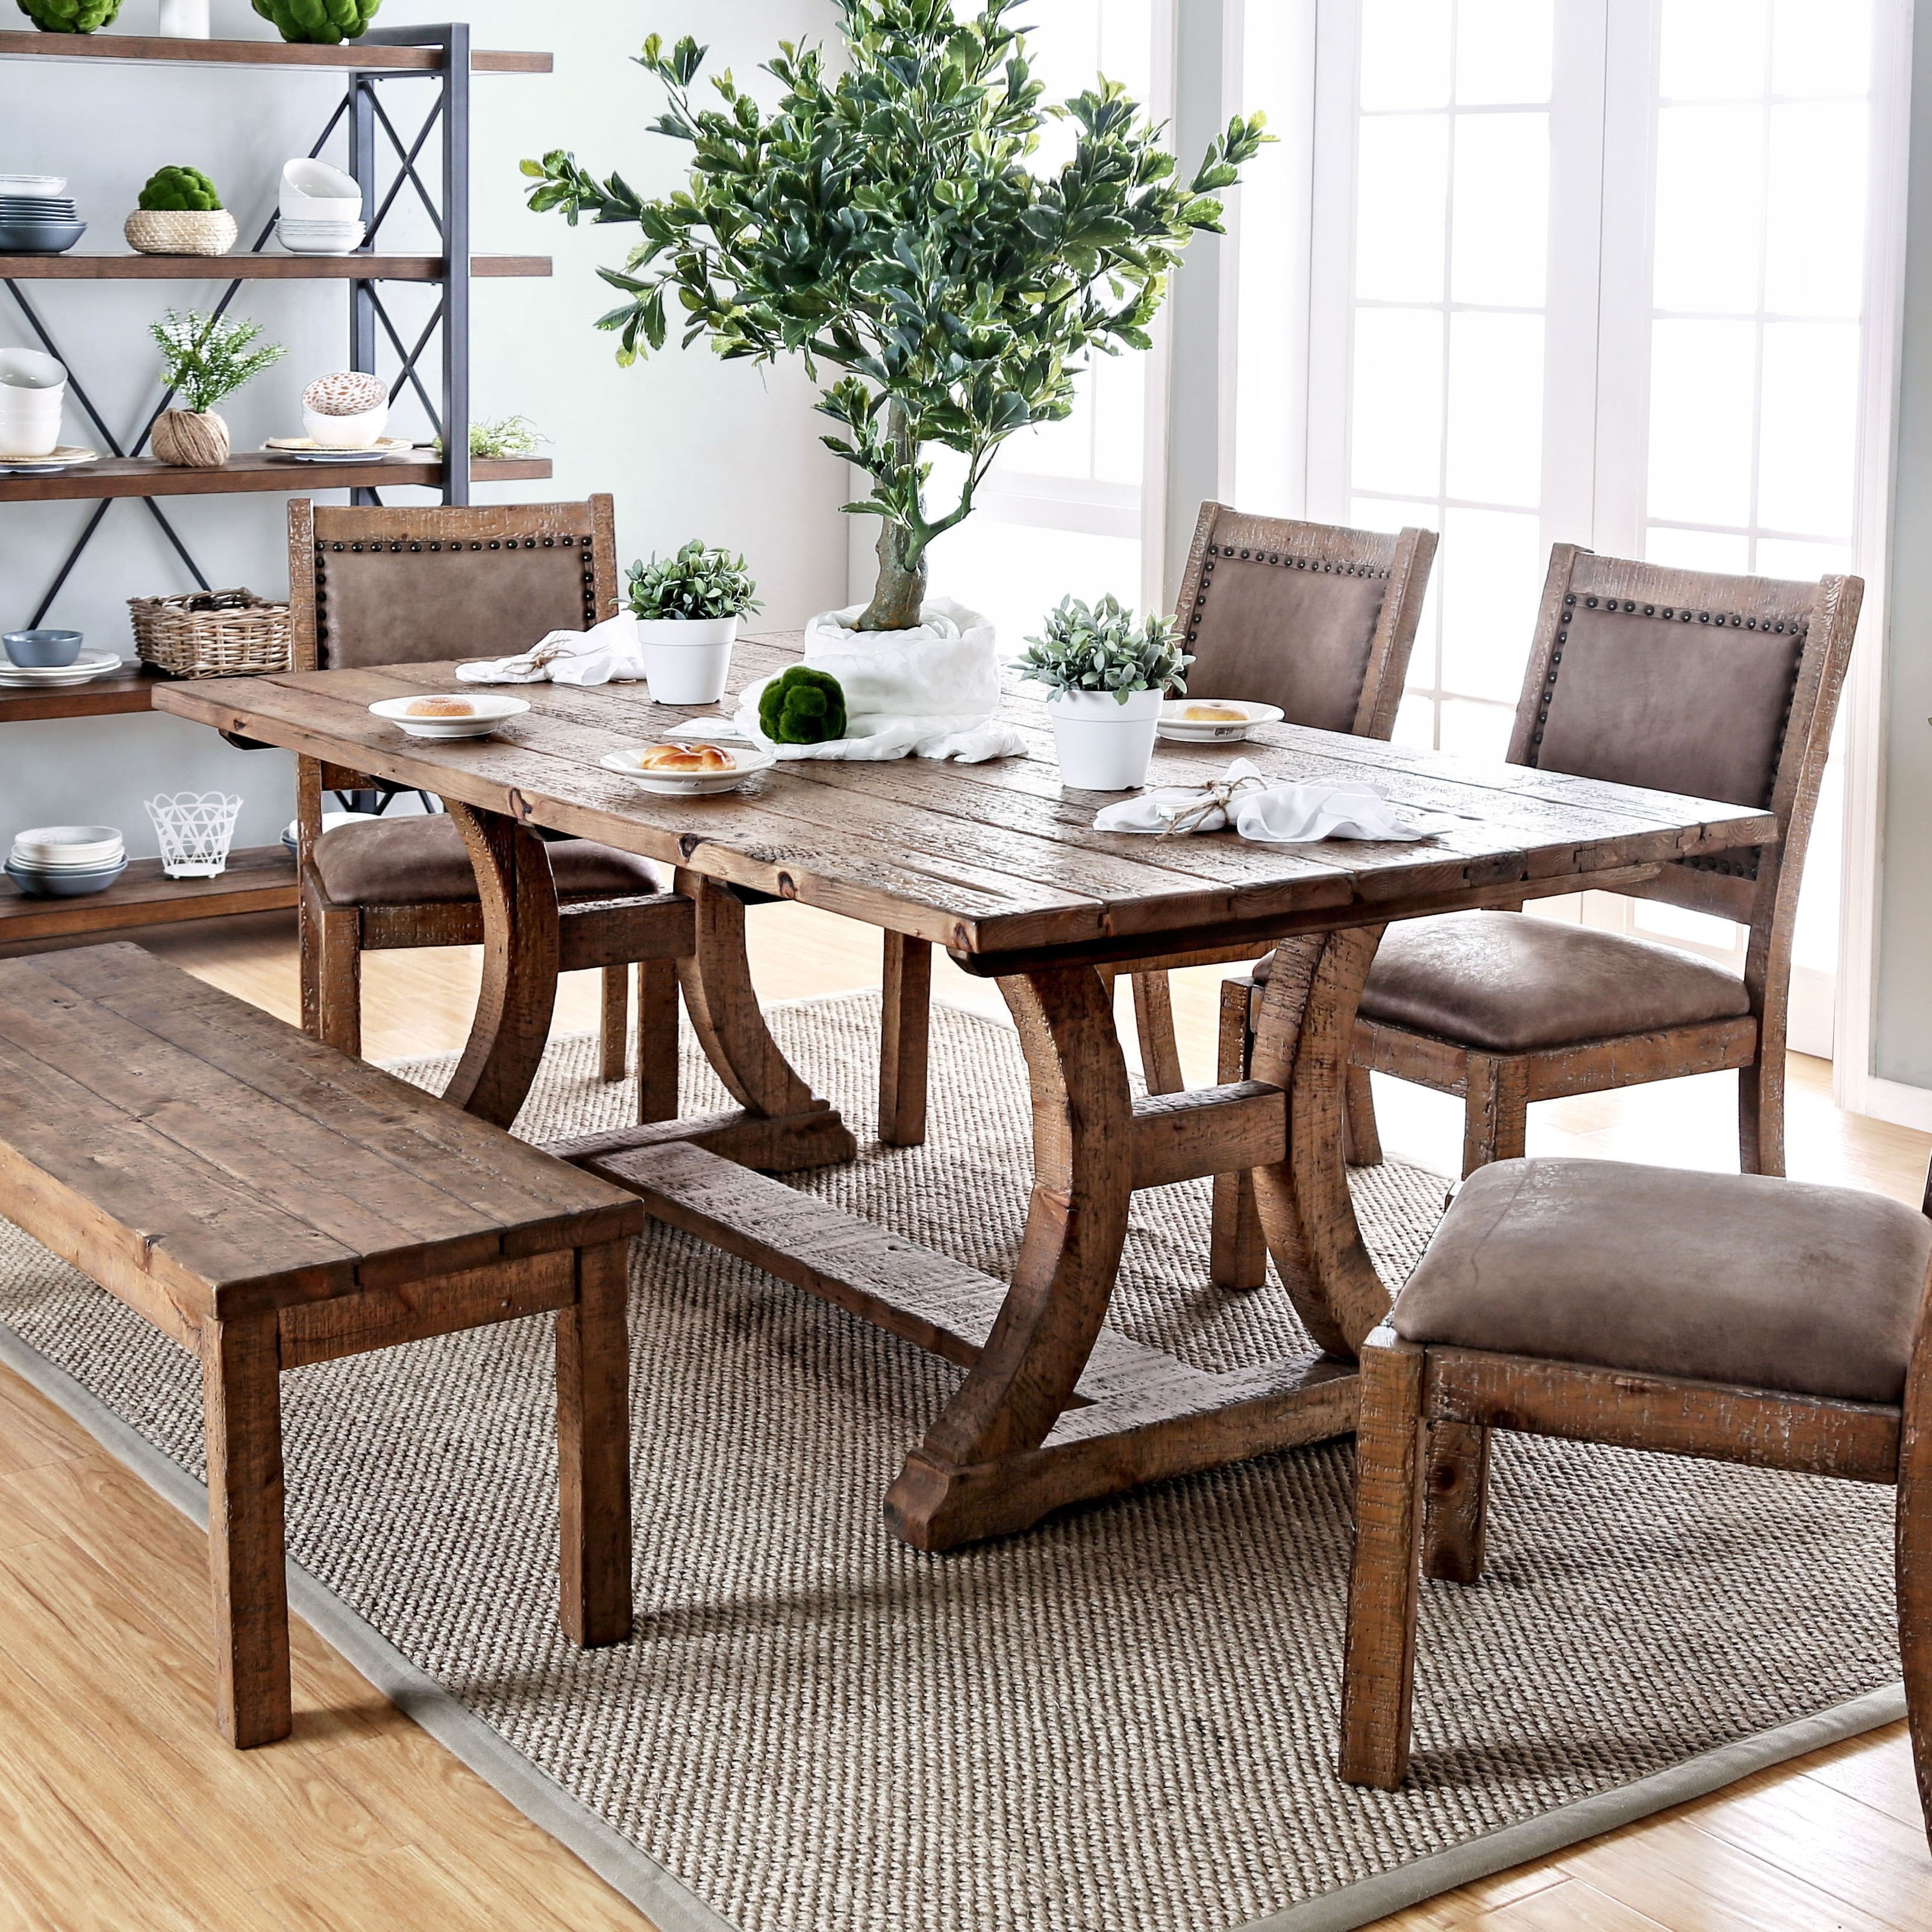 Furniture Of America Sail Rustic Pine, 96 Inch Dining Table Seats How Many